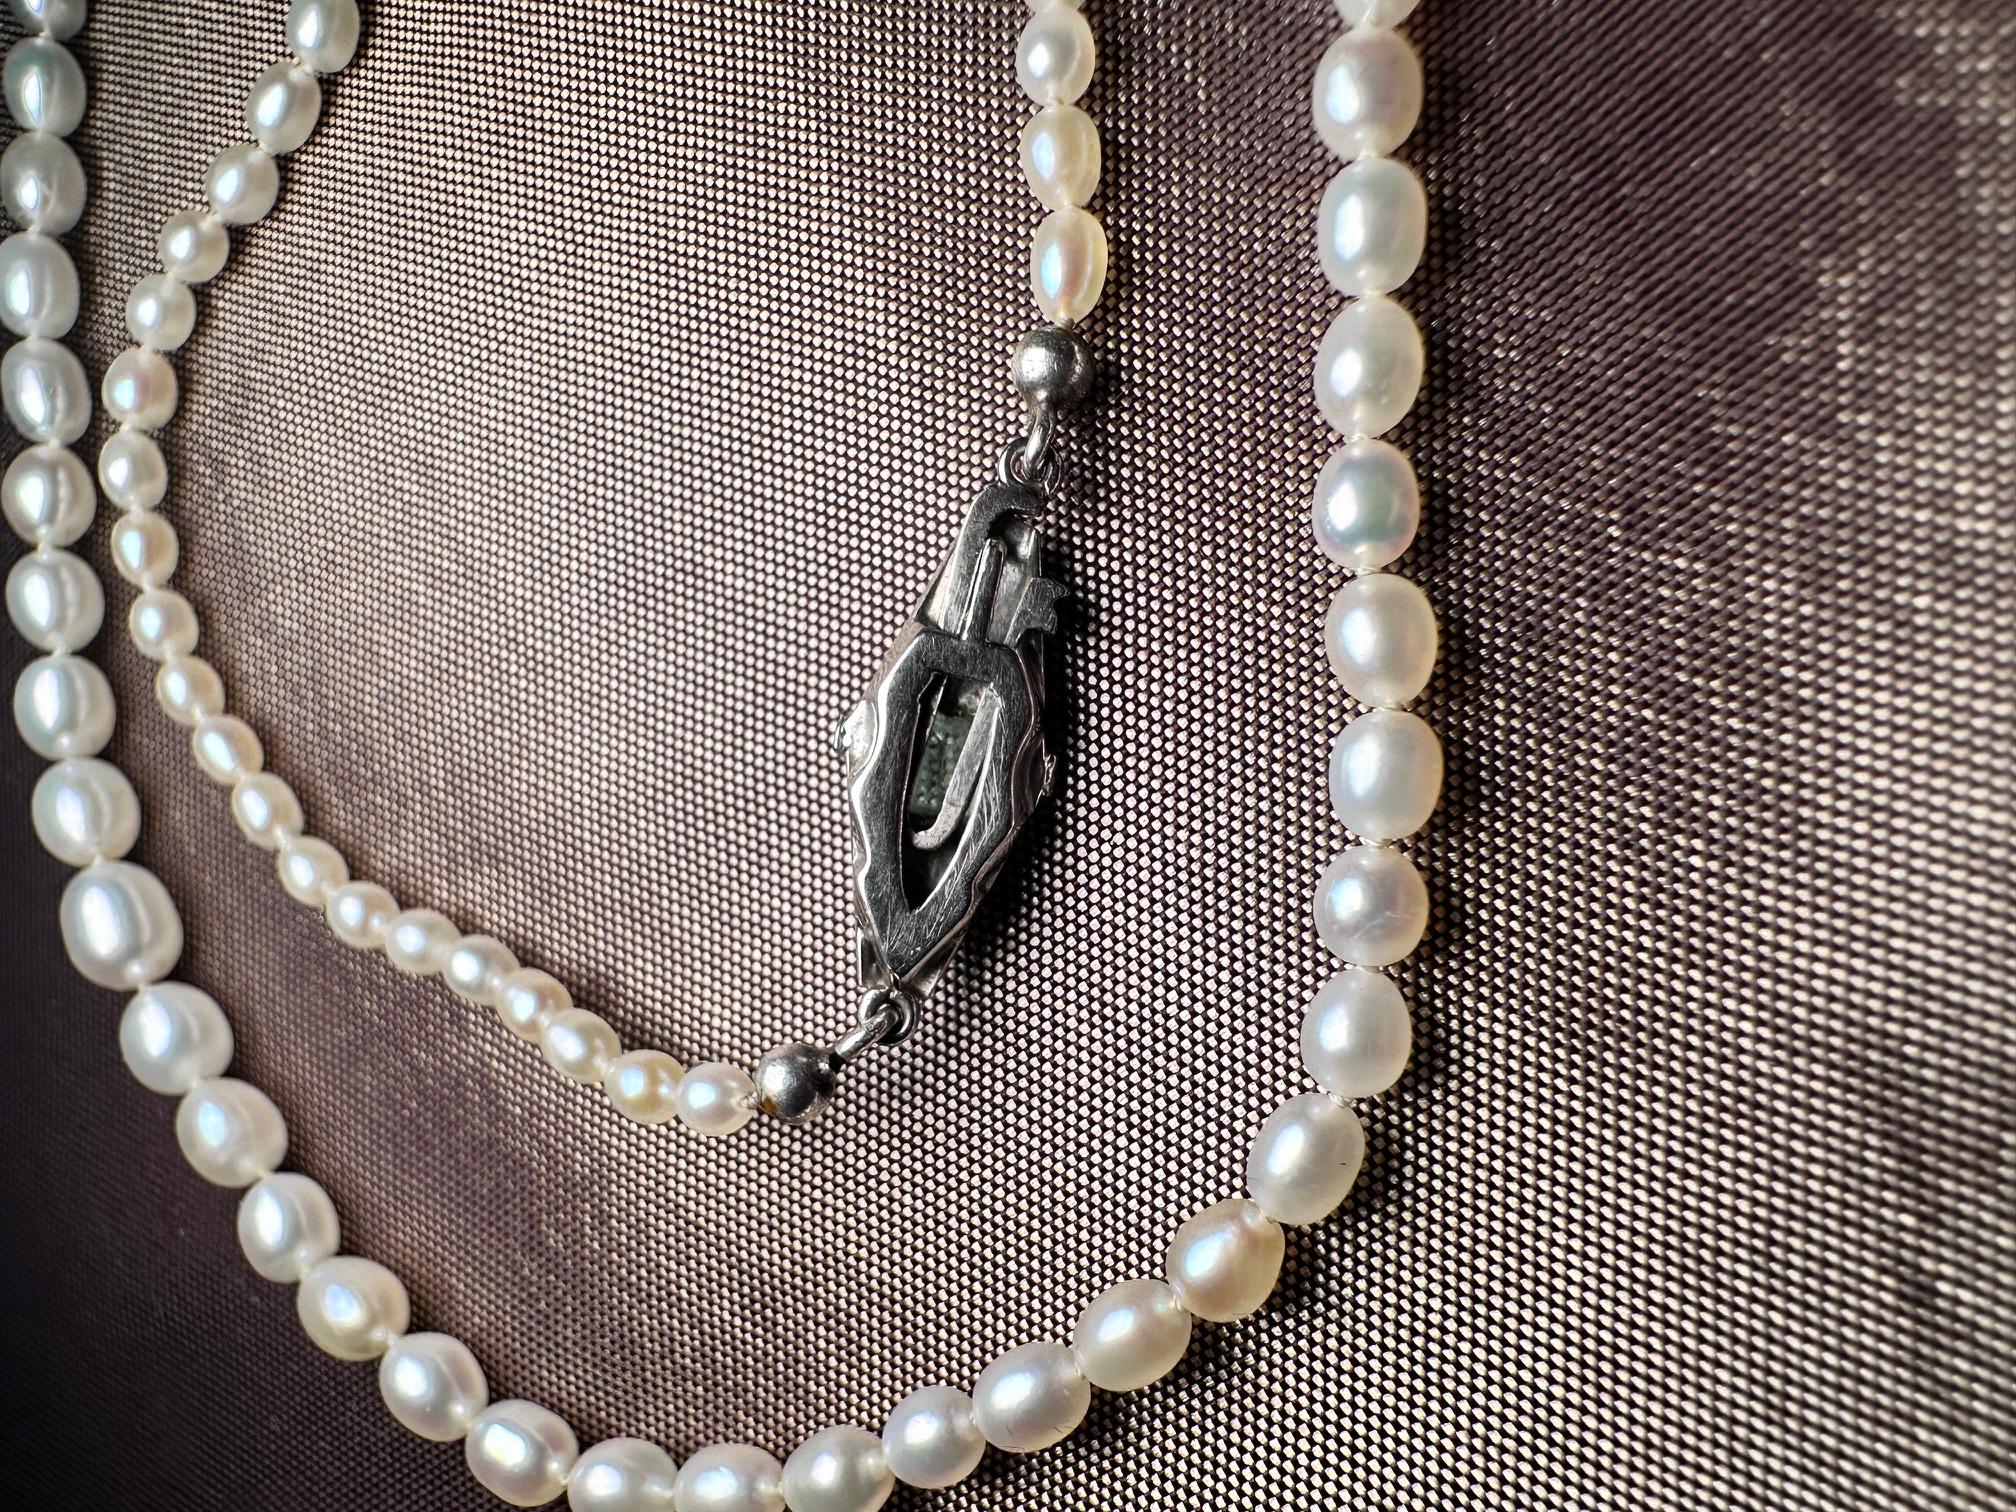 Natural Pearl Necklace In Fair Condition For Sale In London, GB